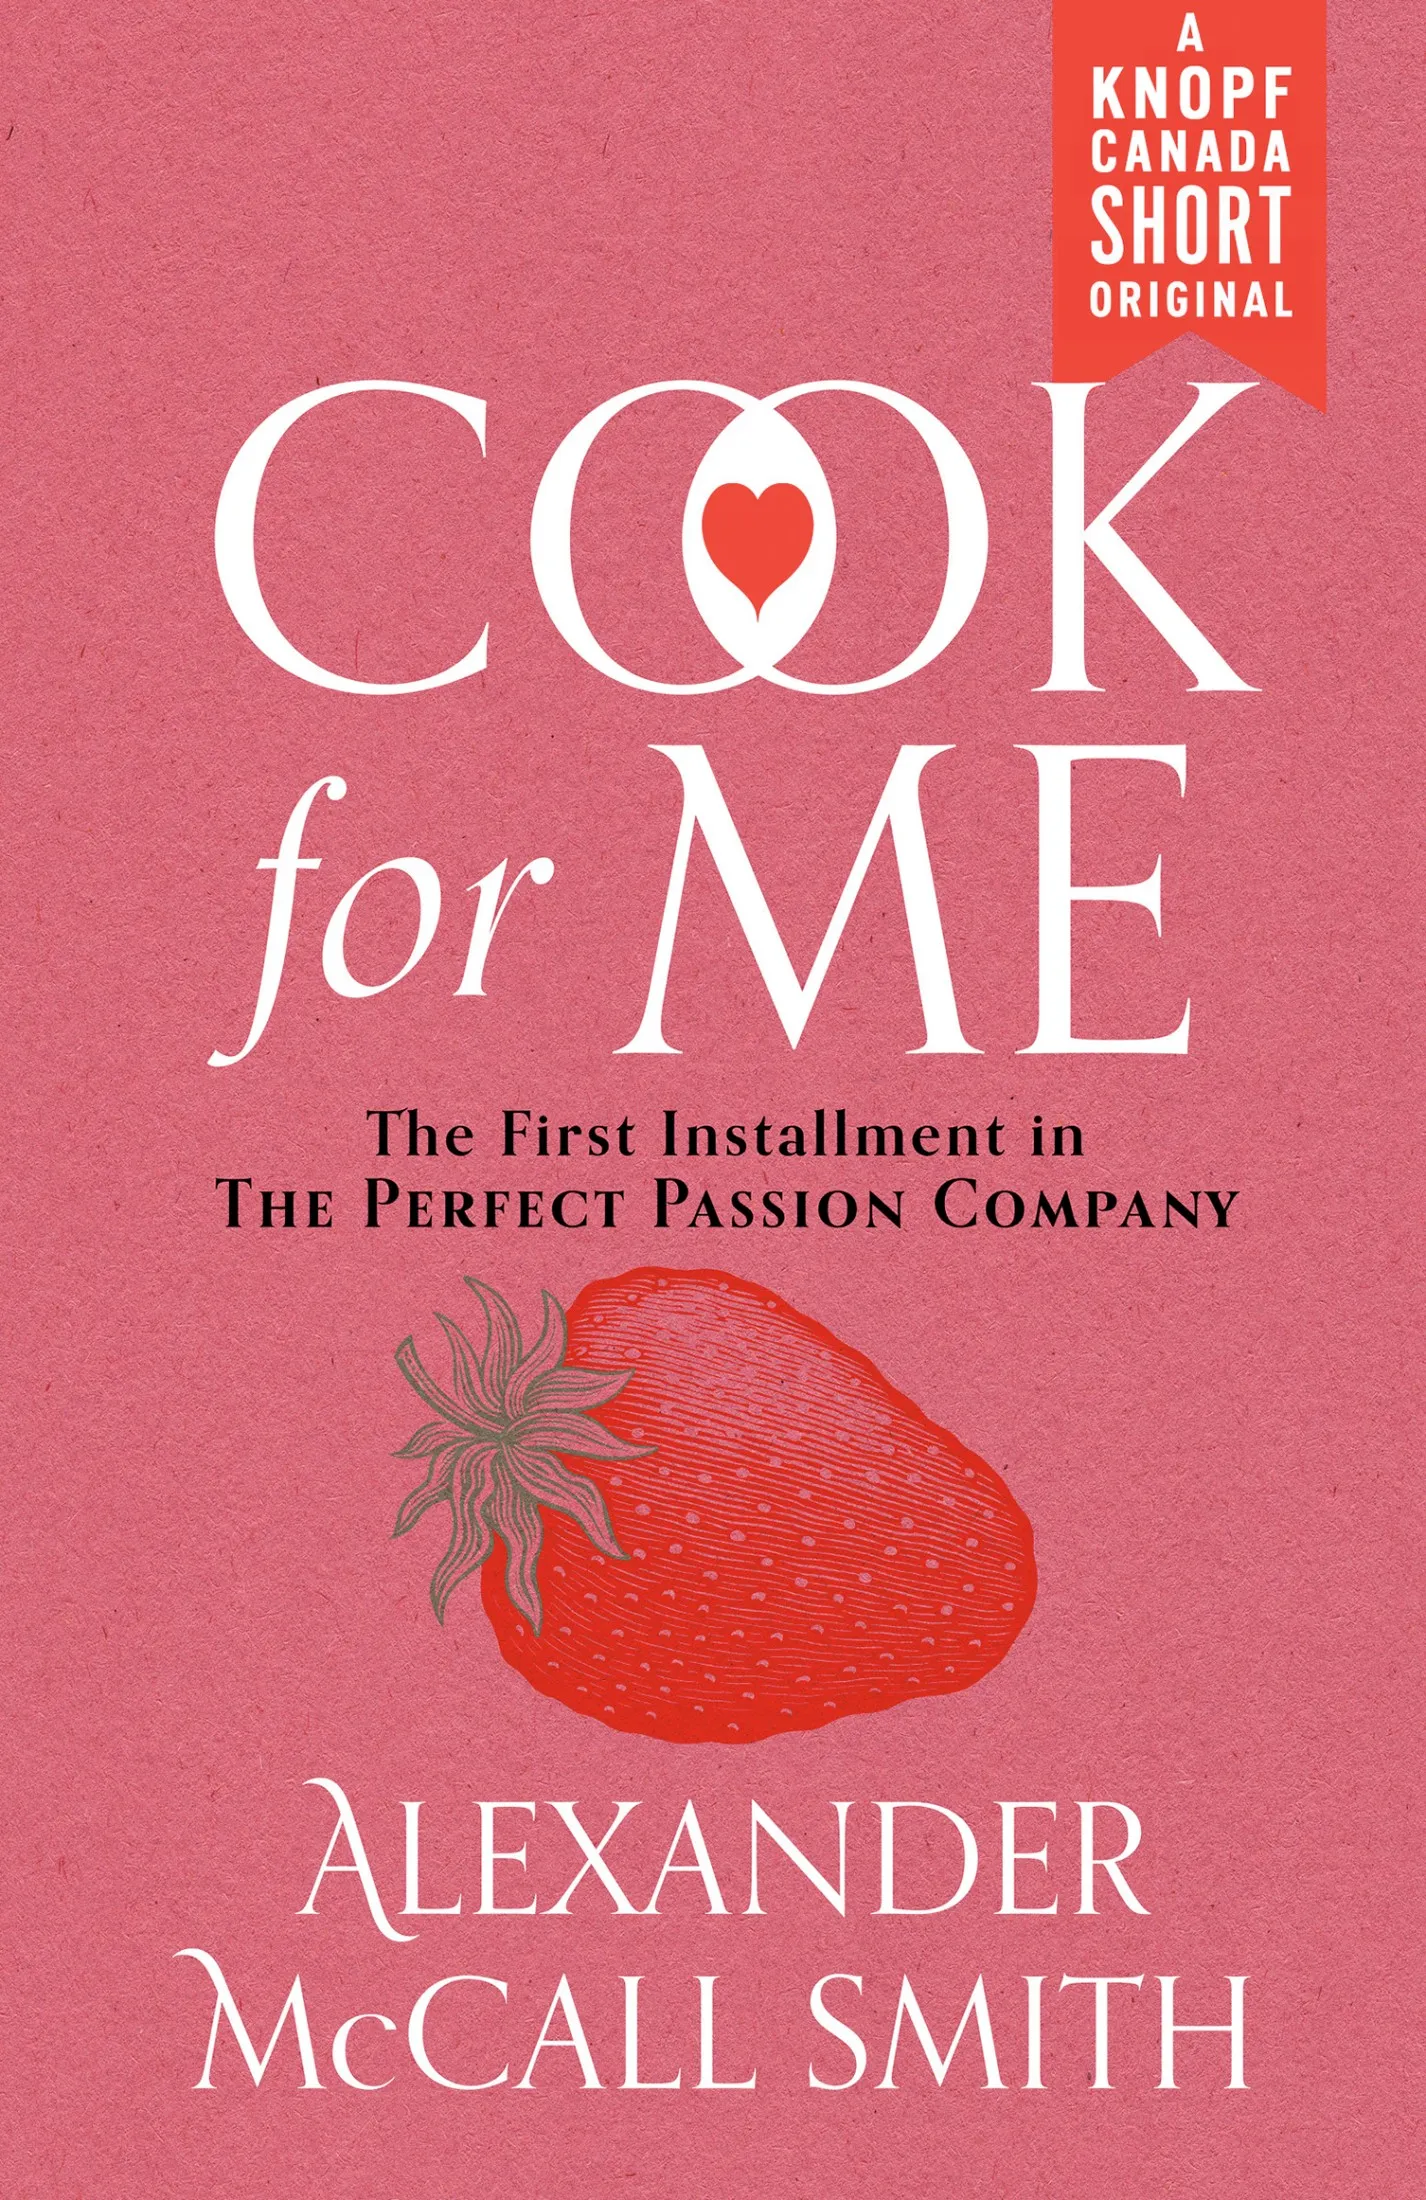 Cook for Me (The Perfect Passion Company #1)